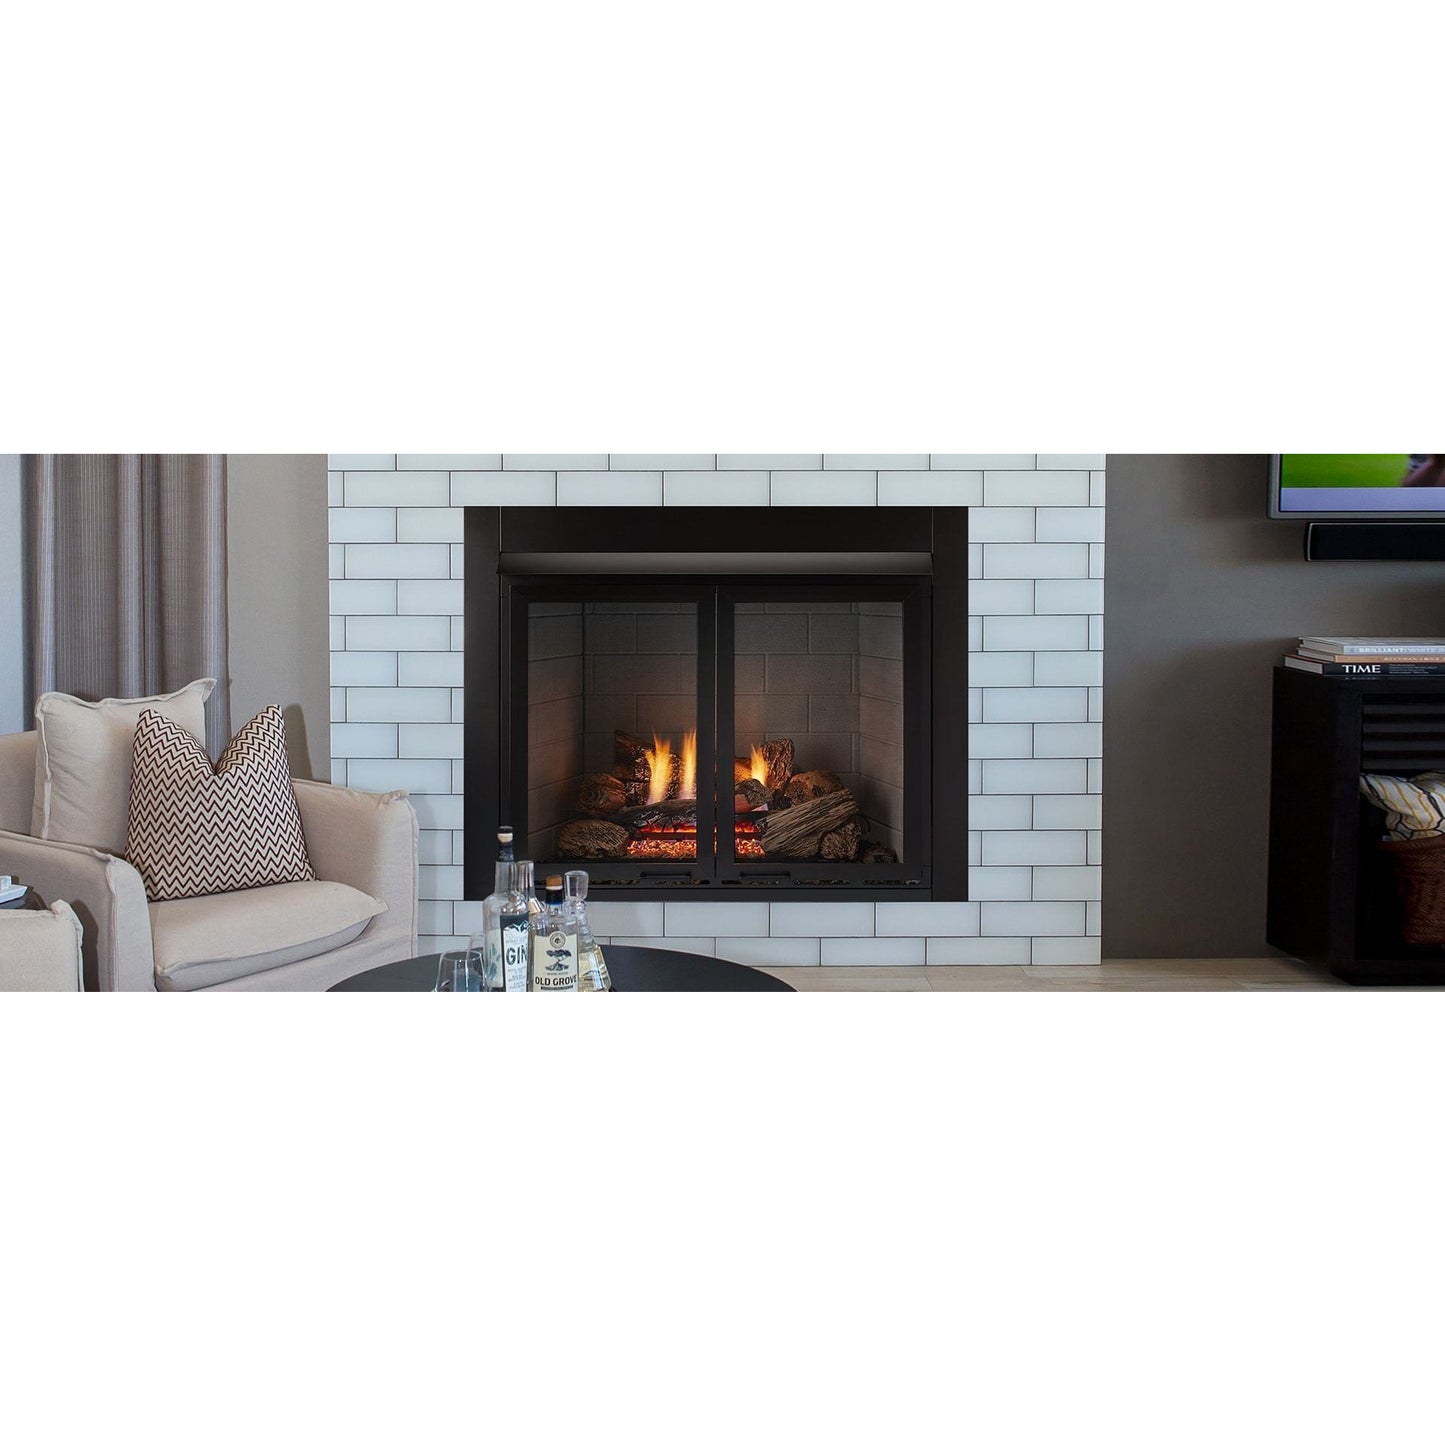 Monessen Lo-Rider 42" Clean Face Gas Firebox LCUF42CR - Everything Fireplaces